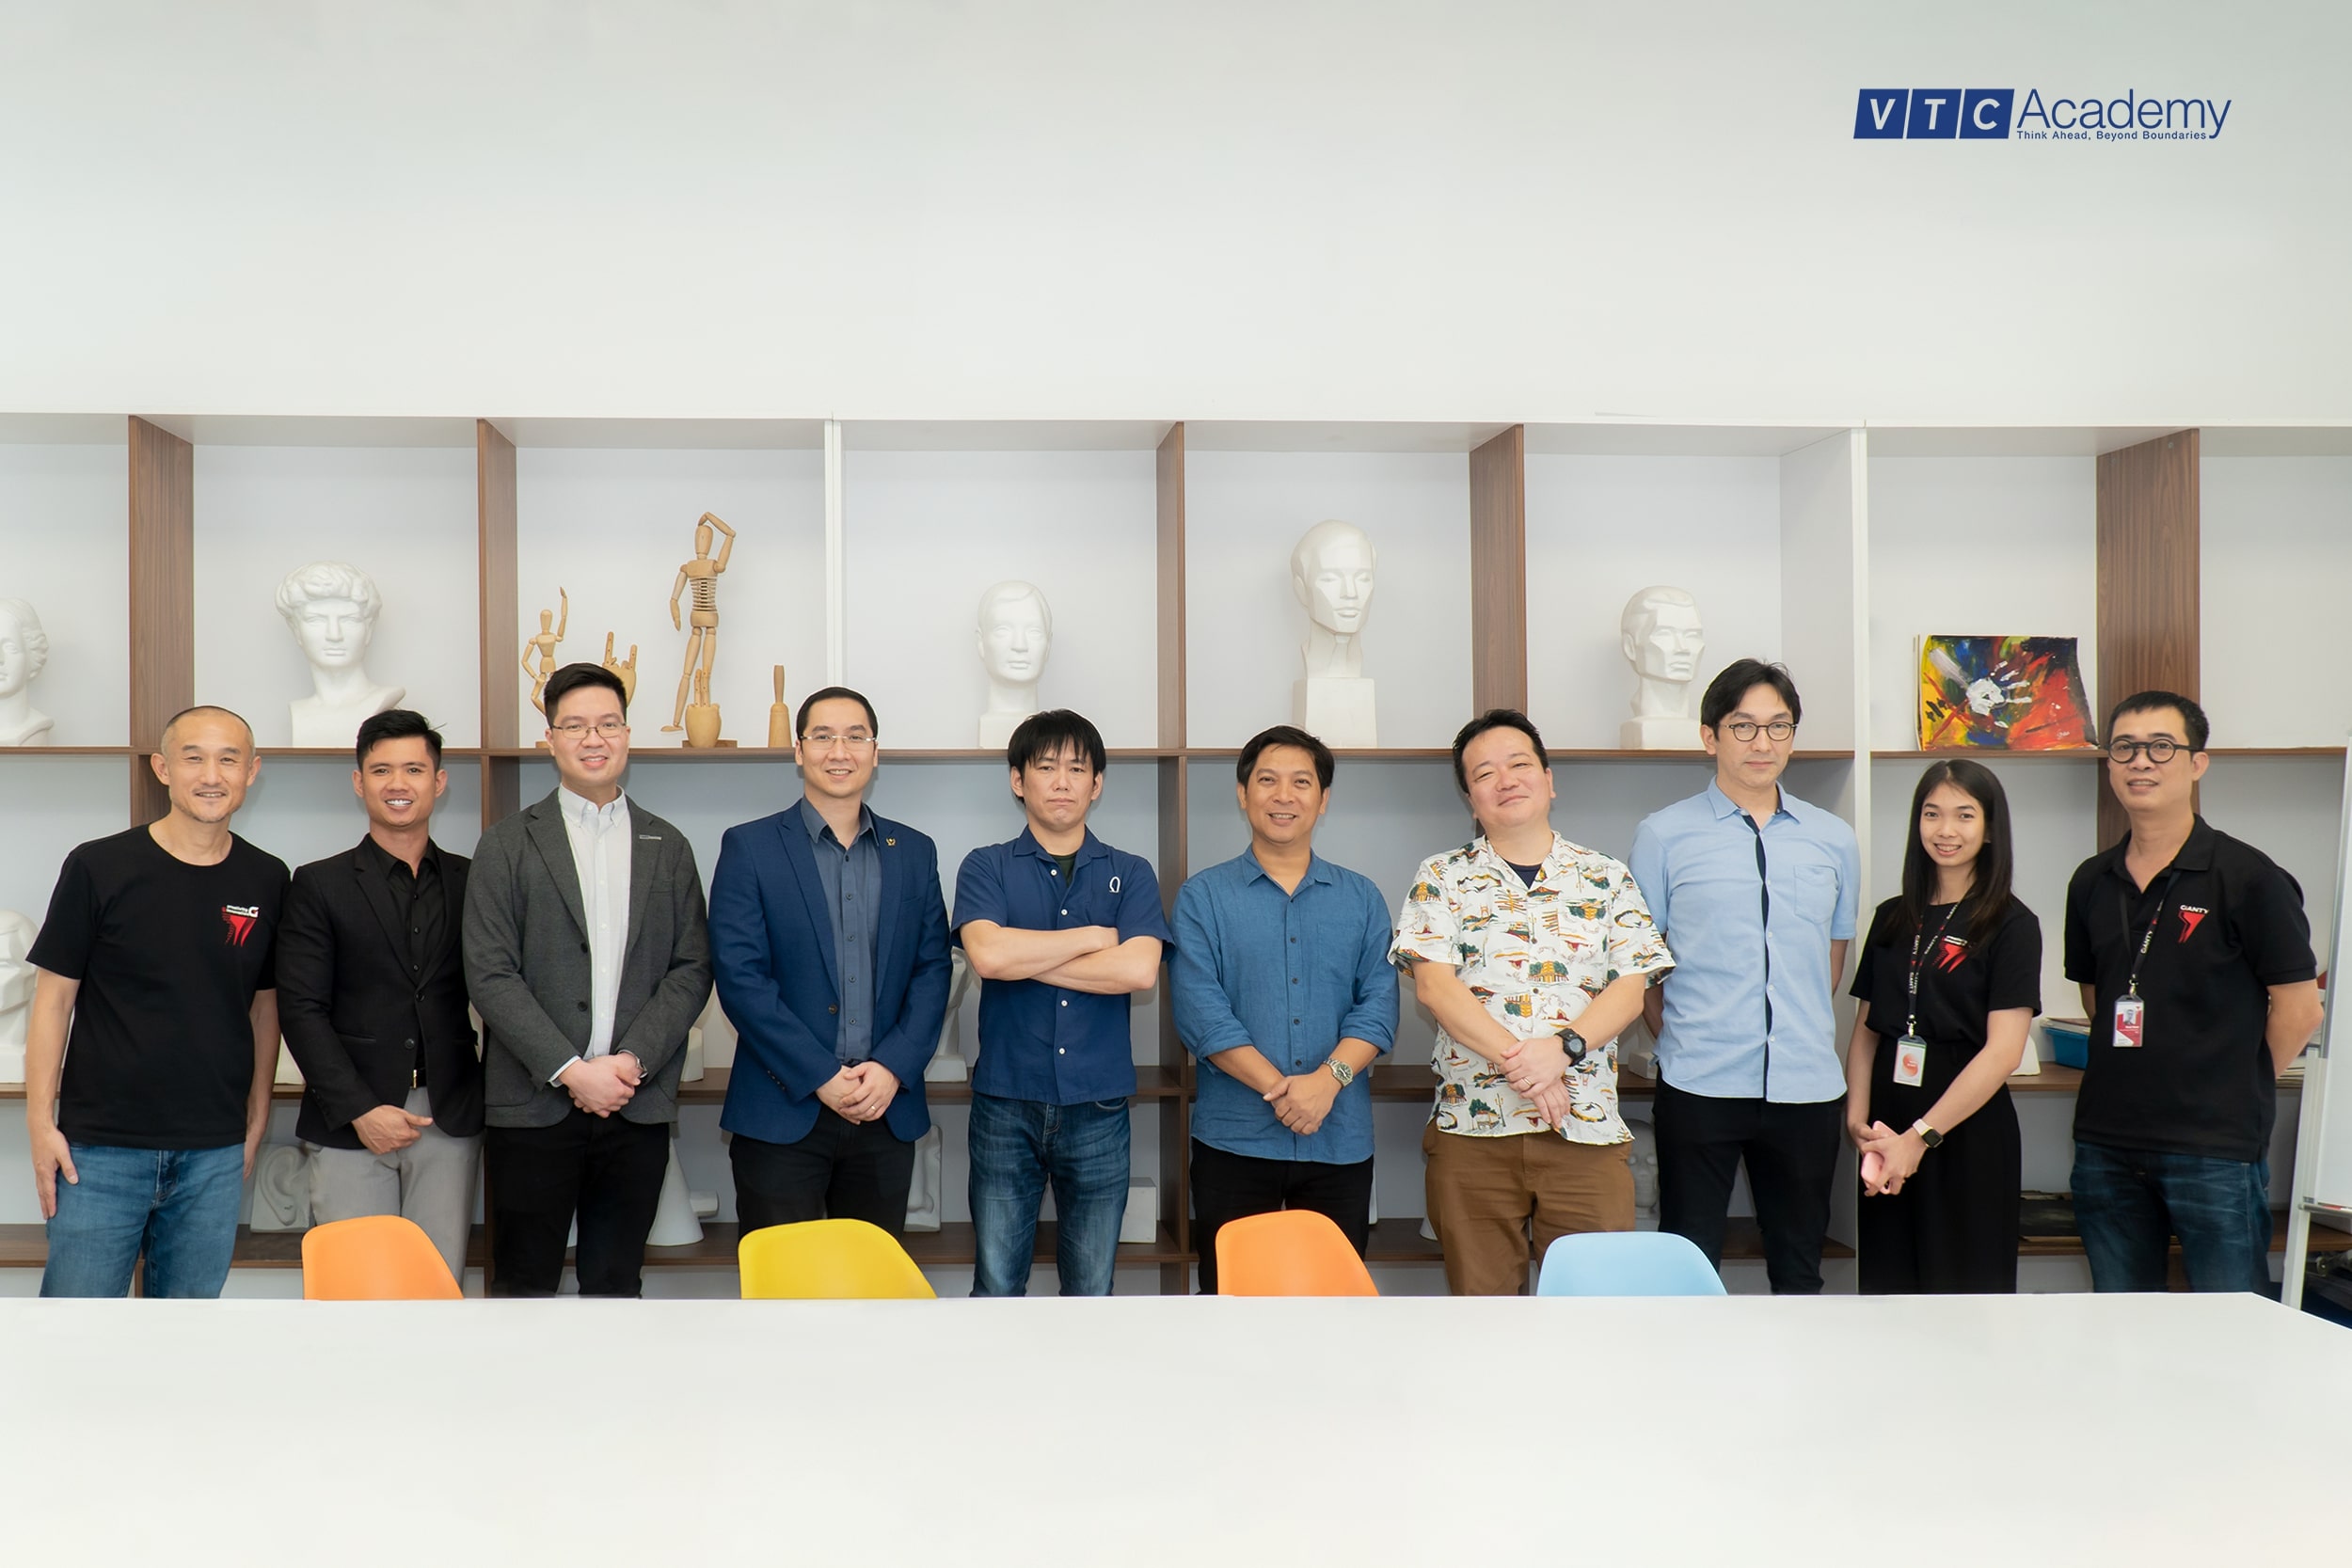 Review VTC Academy: VTC Academy was honoured to welcome the delegation of GIANTY Vietnam for an exchange visit.